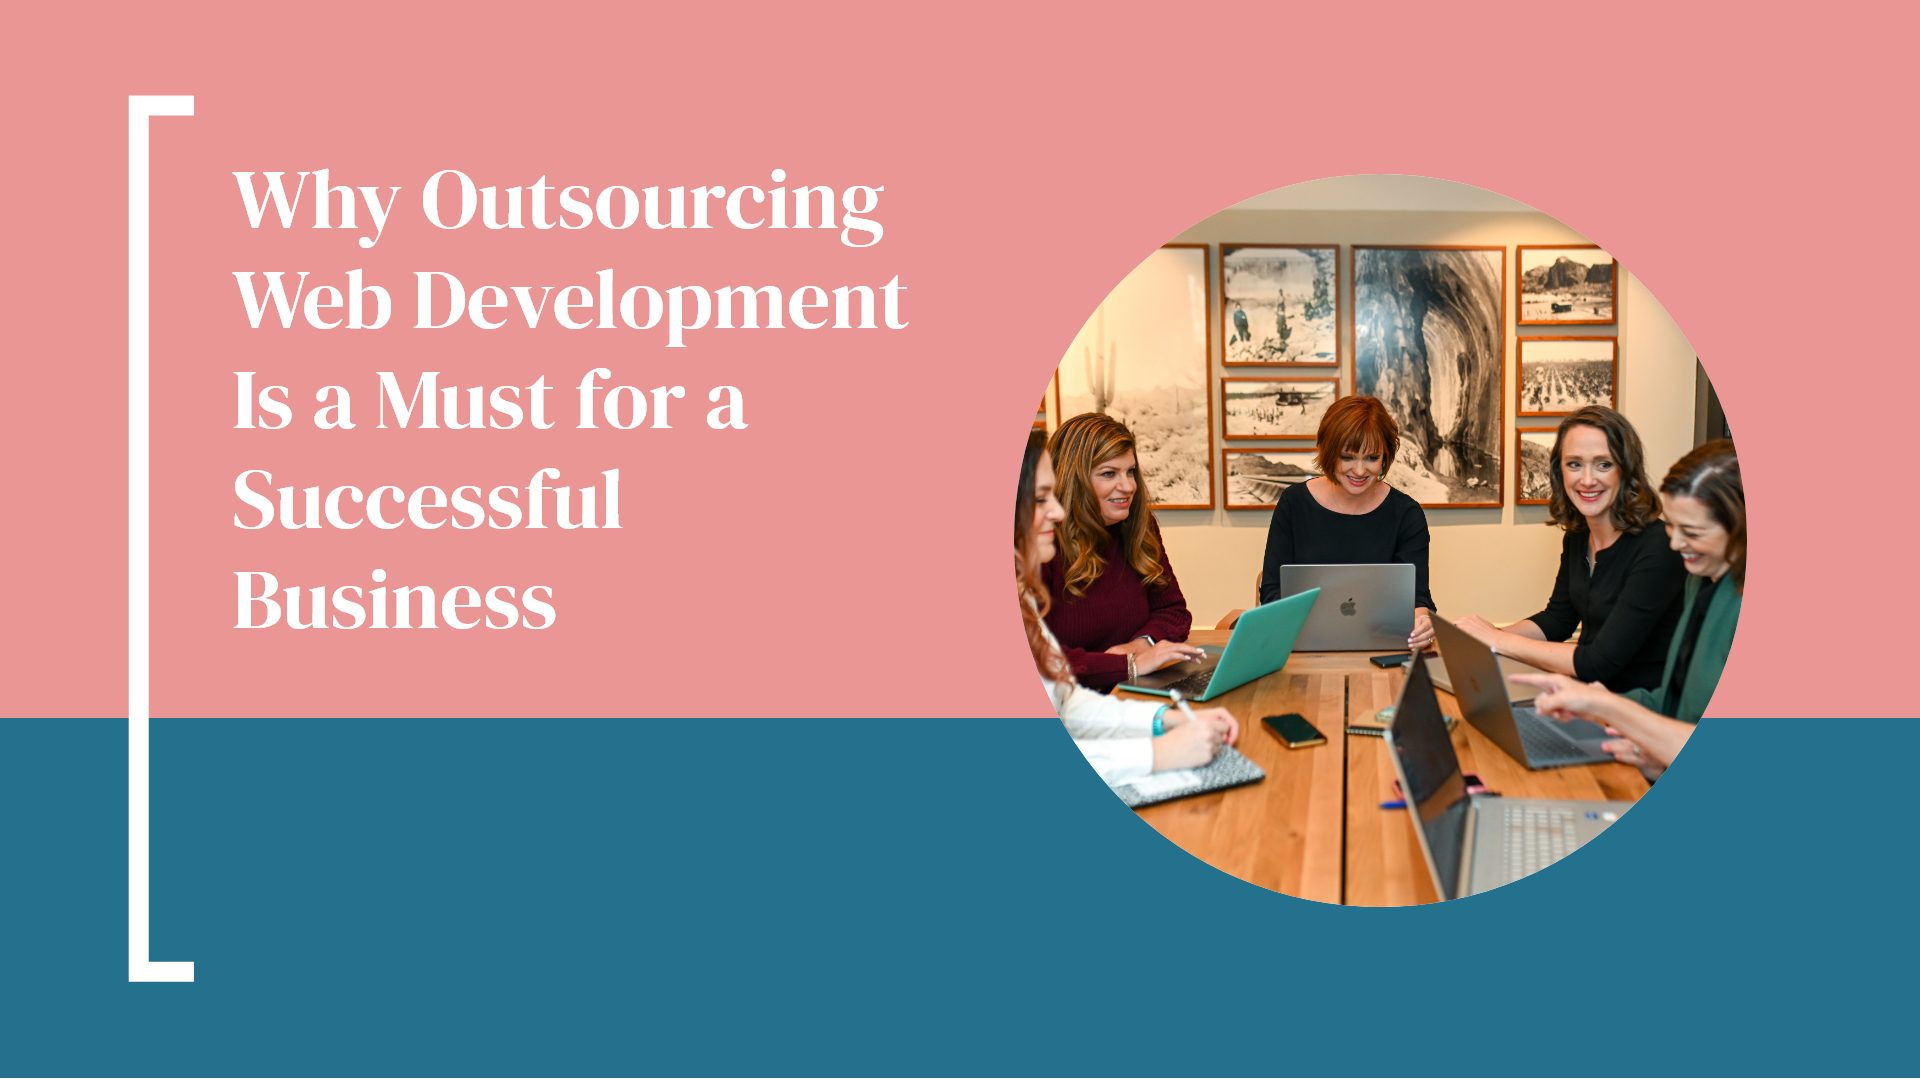 Why Outsourcing Web Development Is a Must for a Successful Business